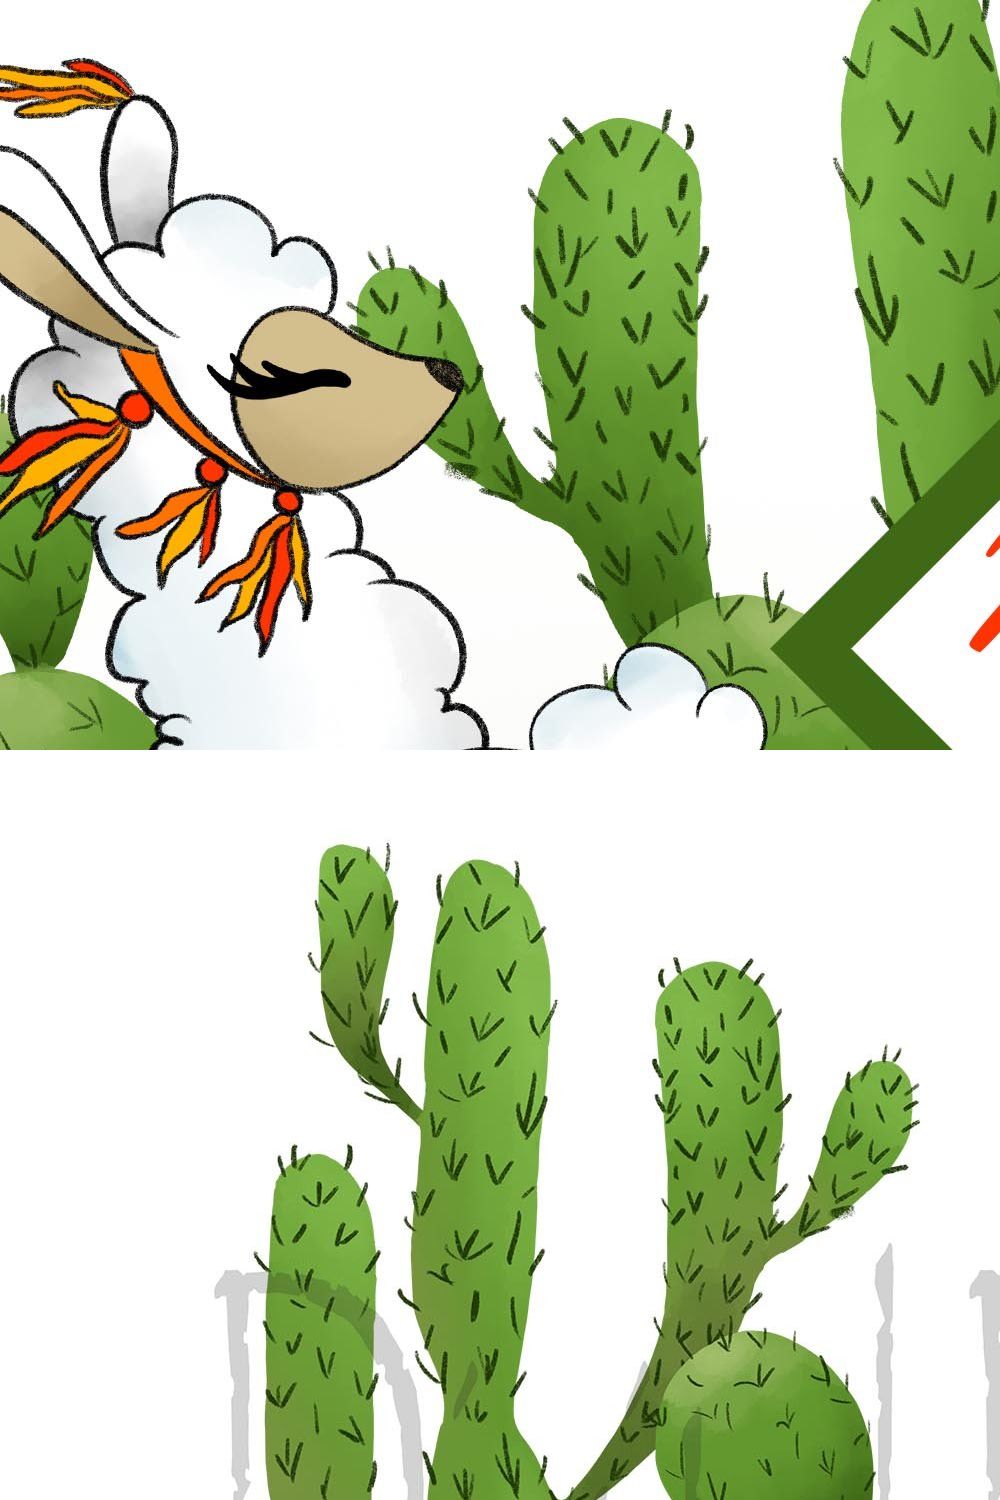 Mountain llama clipart pinterest preview image.